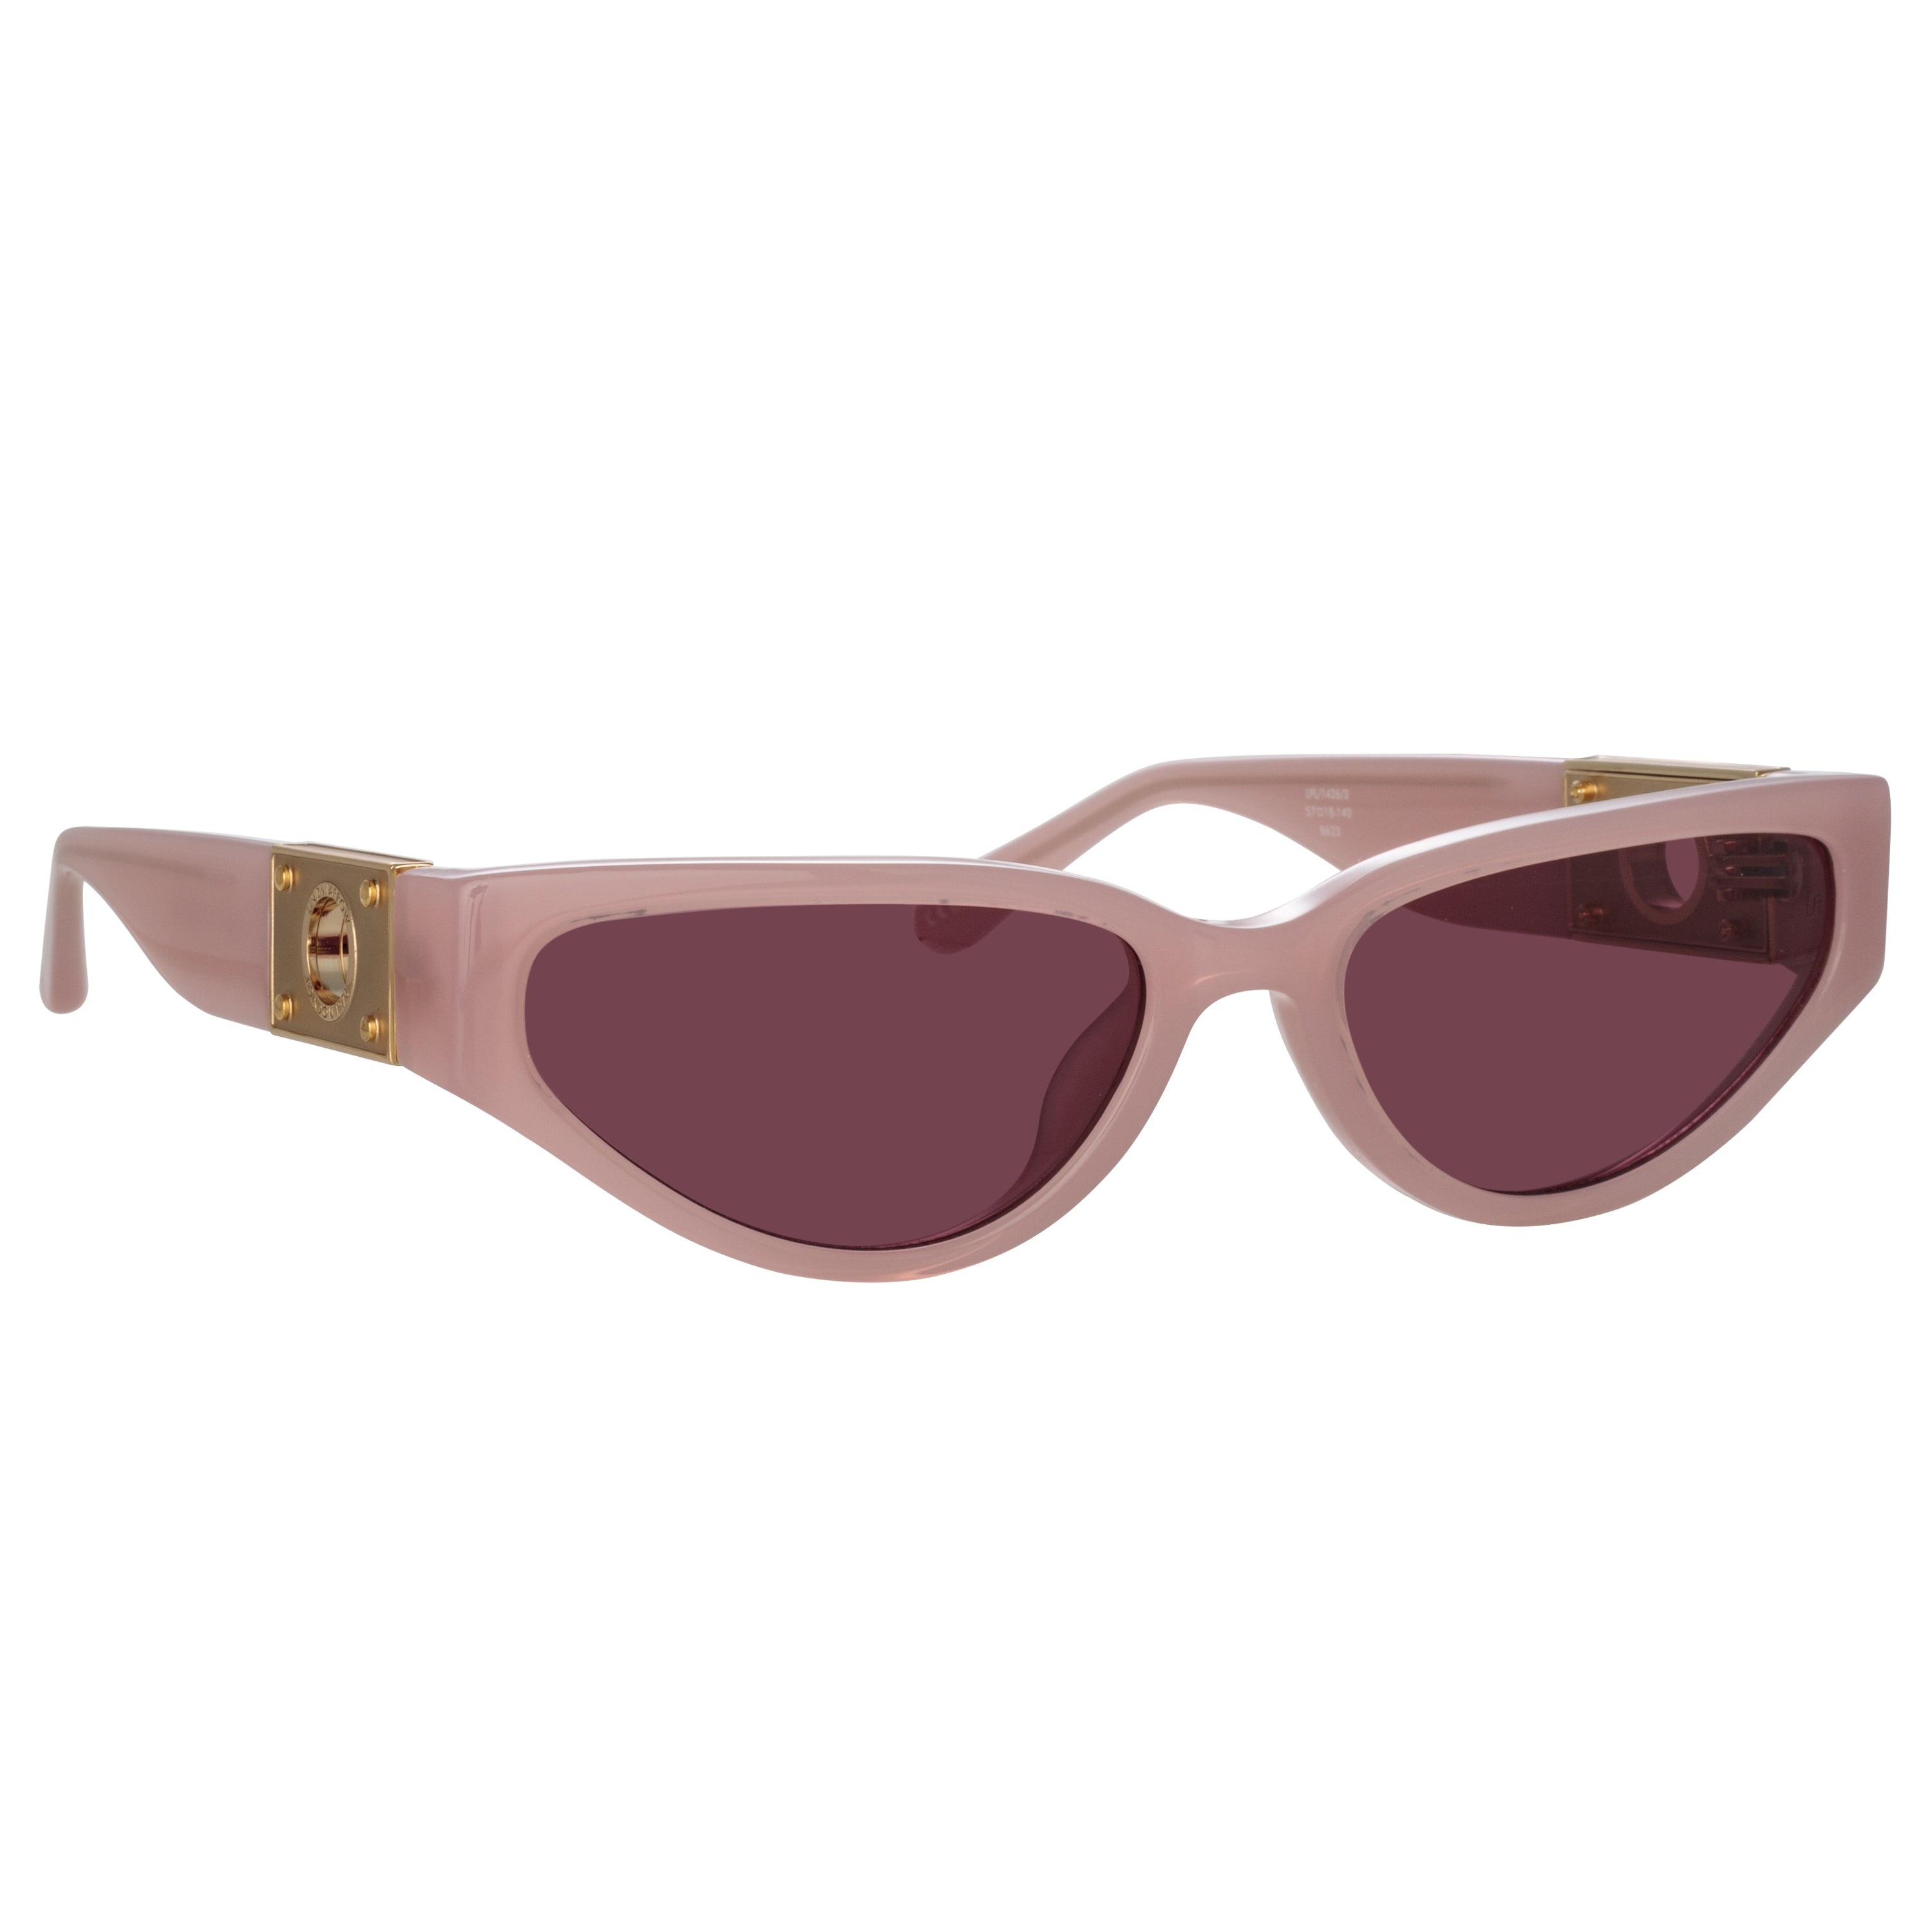 TOMIE CAT EYE SUNGLASSES IN LILAC - 4